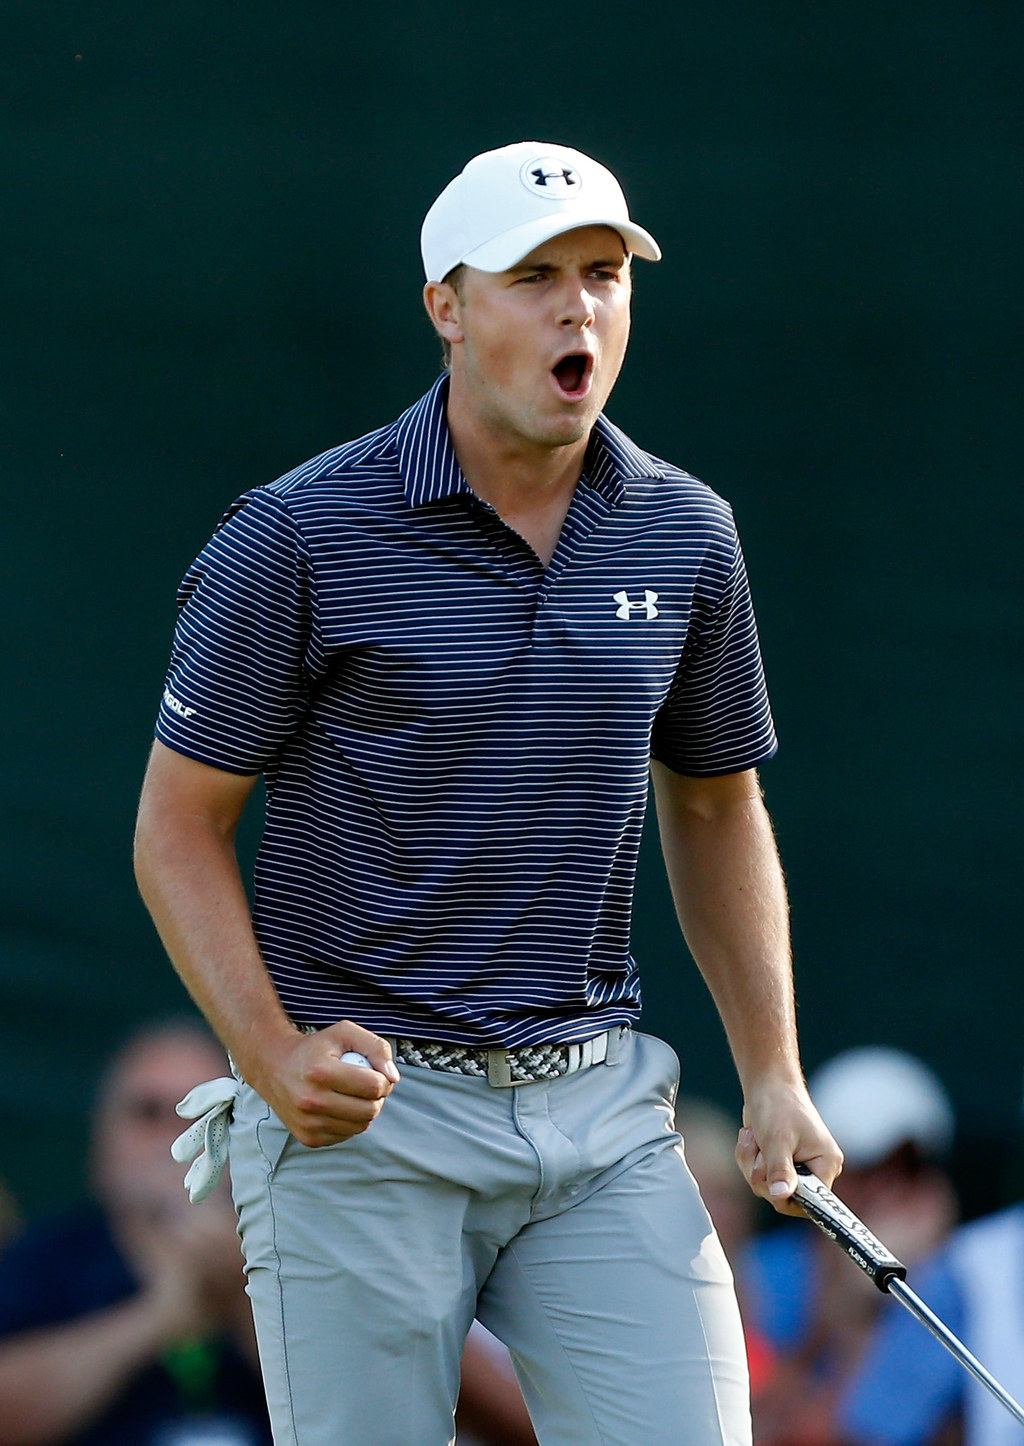 Why Jordan Spieth Is The Hottest Thing To Happen To The Game Of Golf